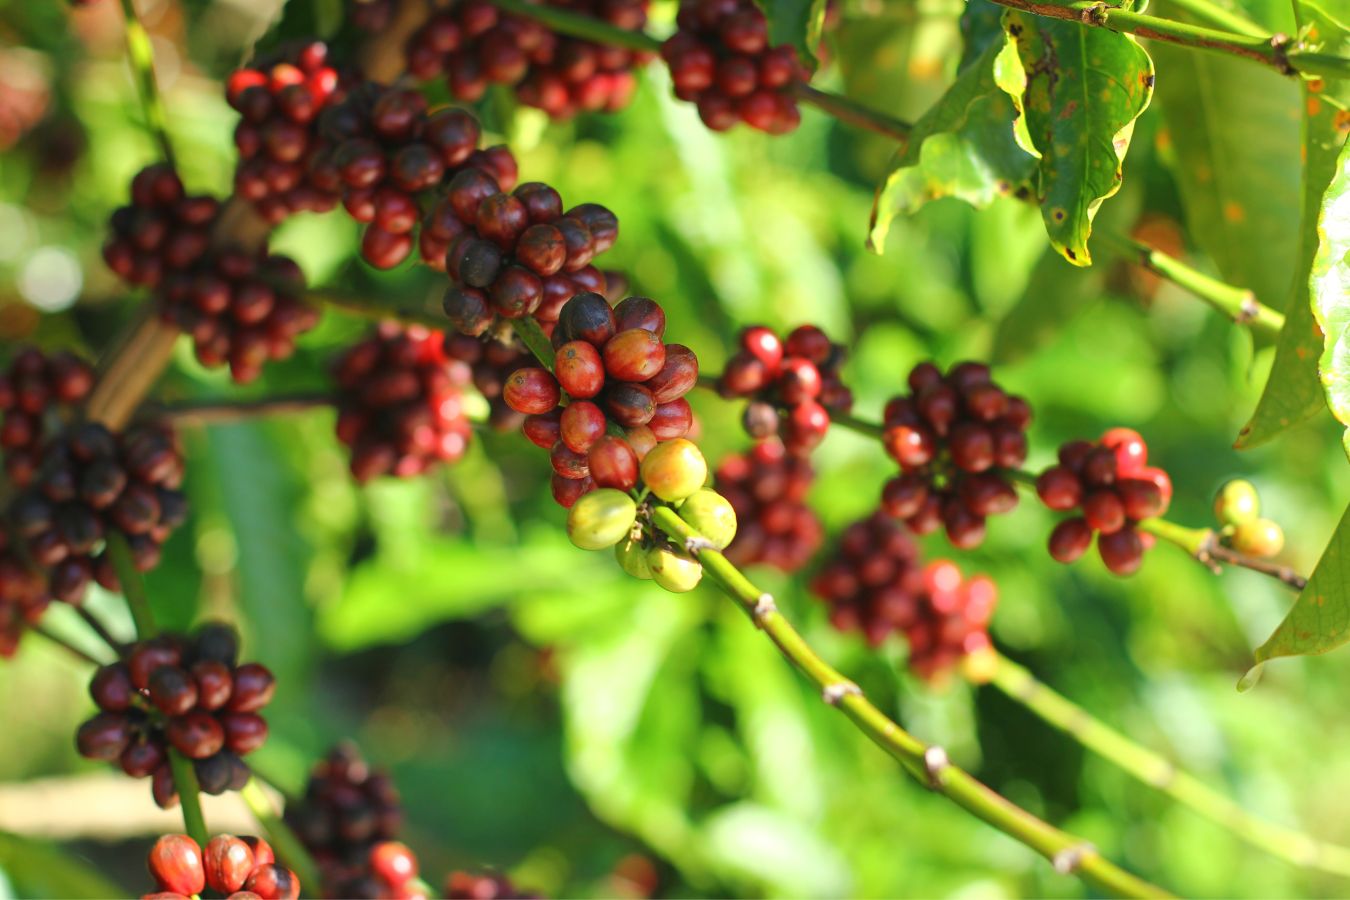 Export & Import Coffee From Vietnam By EVFTA Is About 0% Of Taxes - Helena JSC